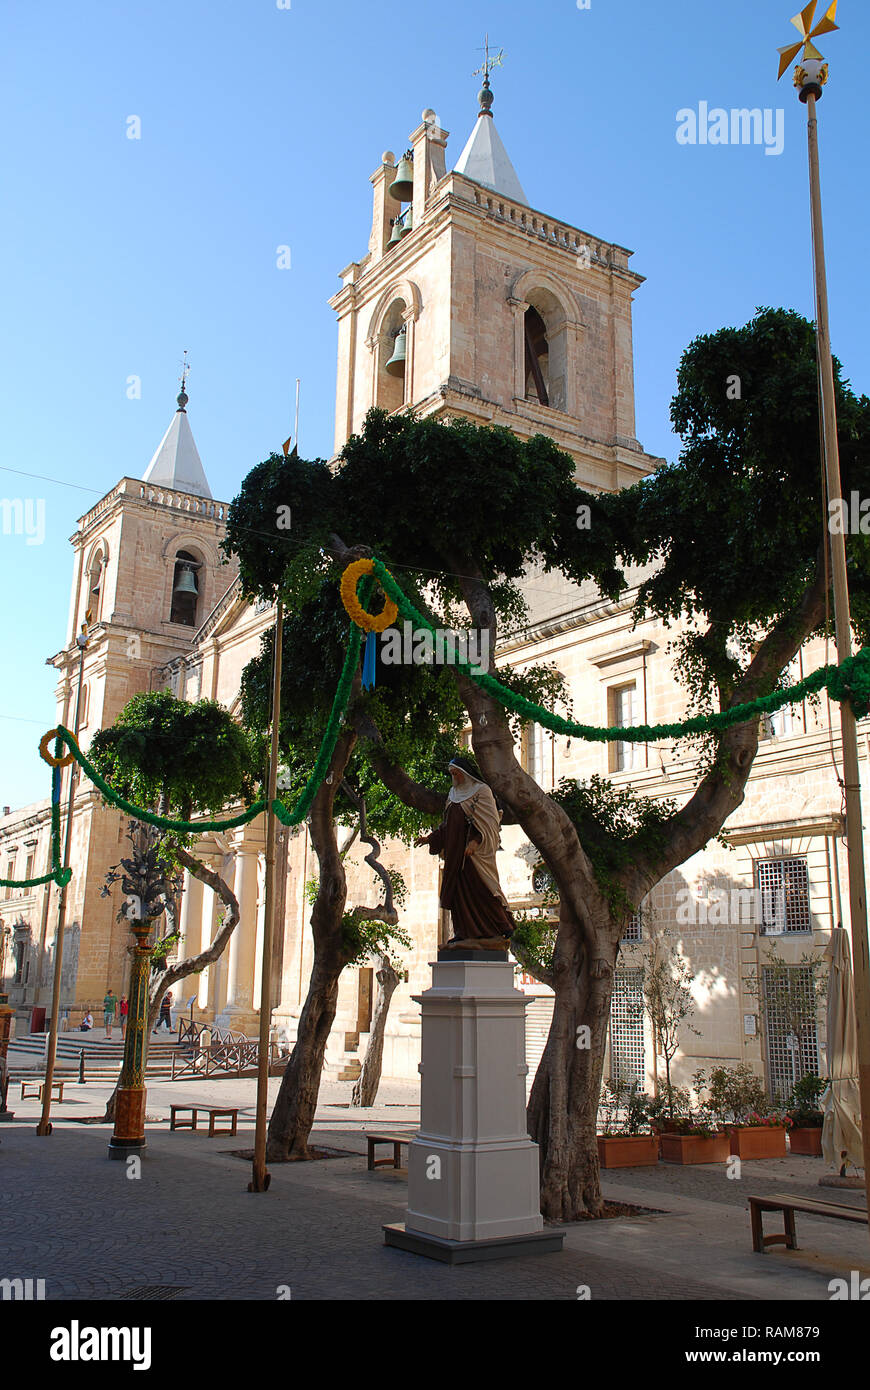 St.Johns Co-Cathedral in Malta's capital Valletta Stock Photo